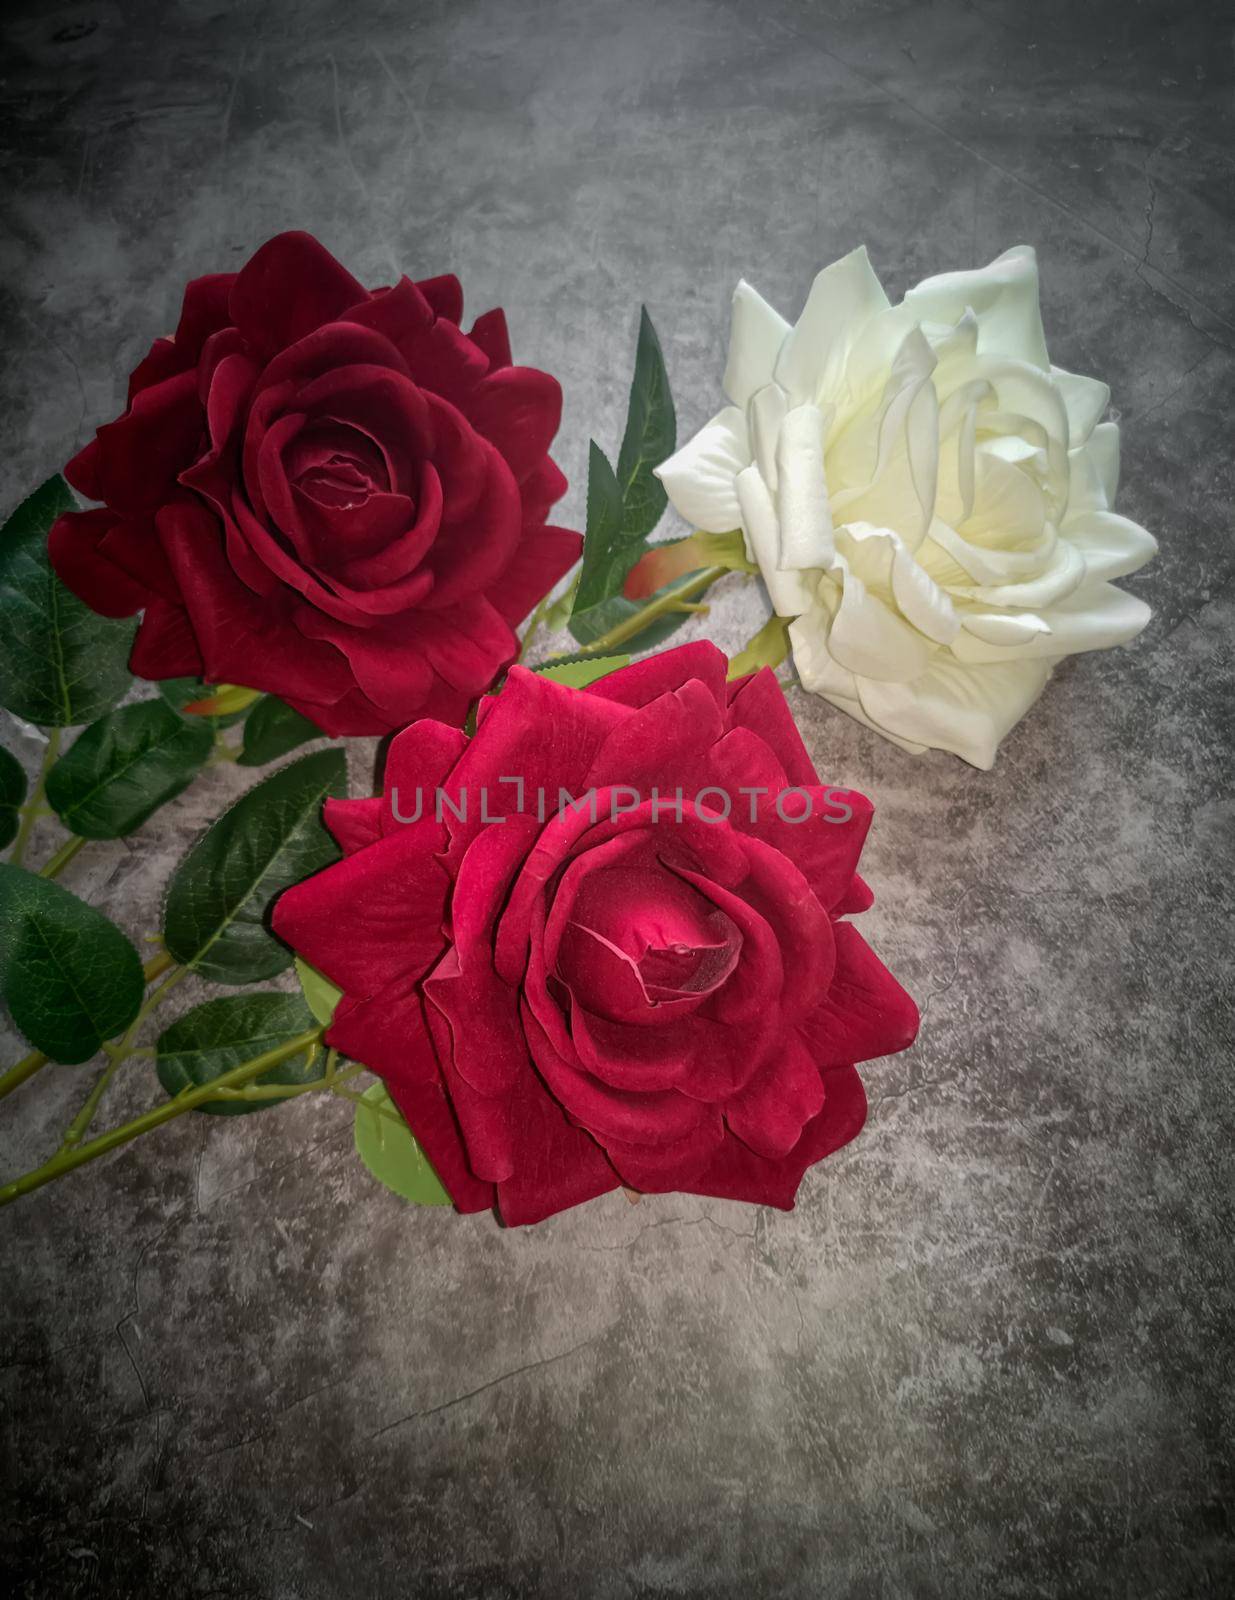 On a dark background, three beautiful artificial roses, two red and one white.